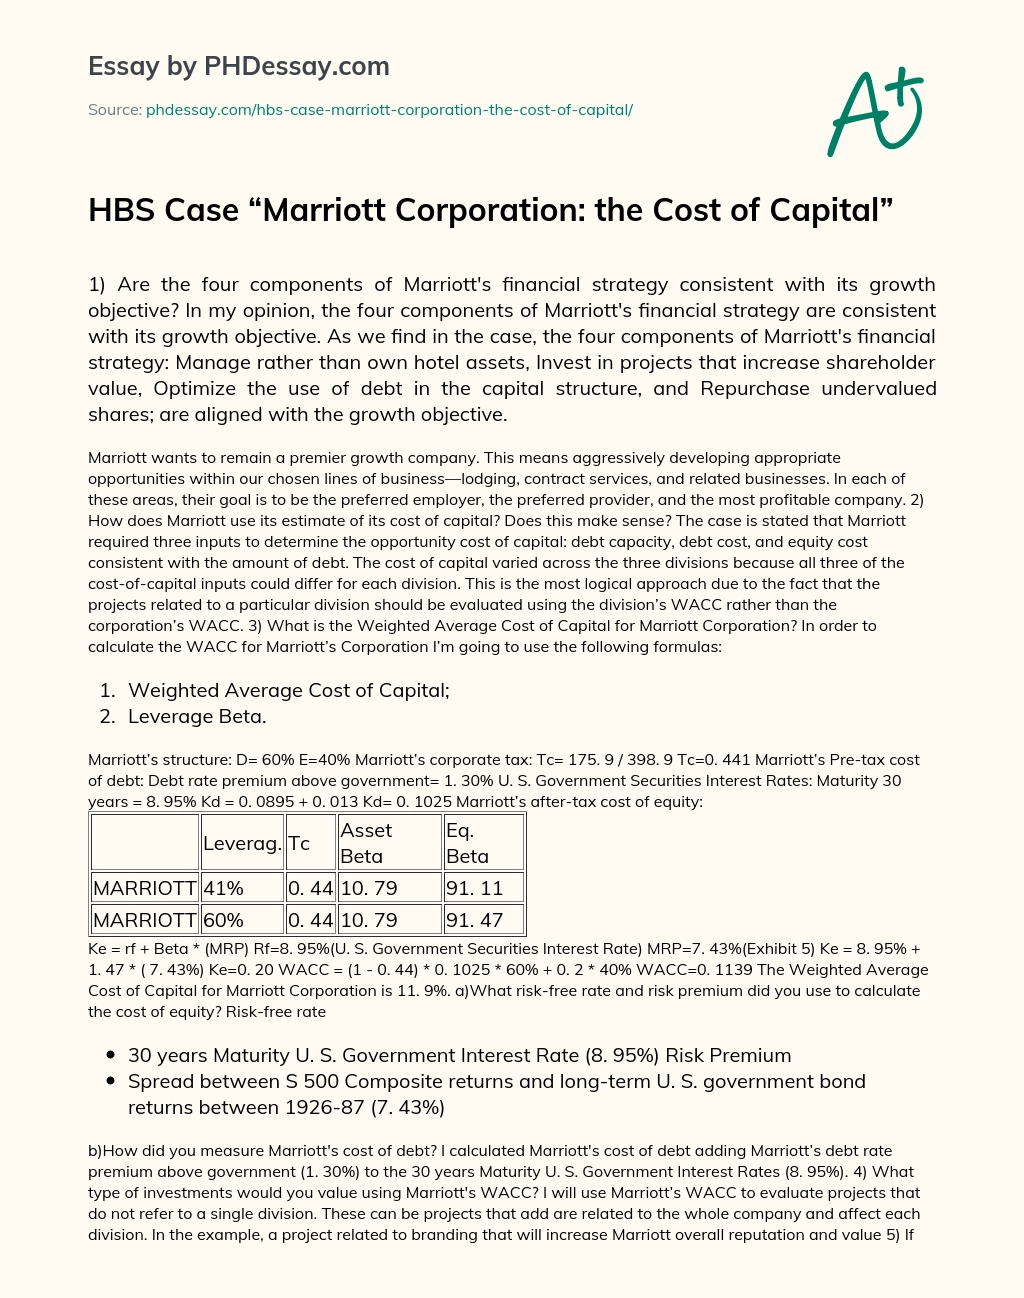 HBS Case “Marriott Corporation: the Cost of Capital” essay